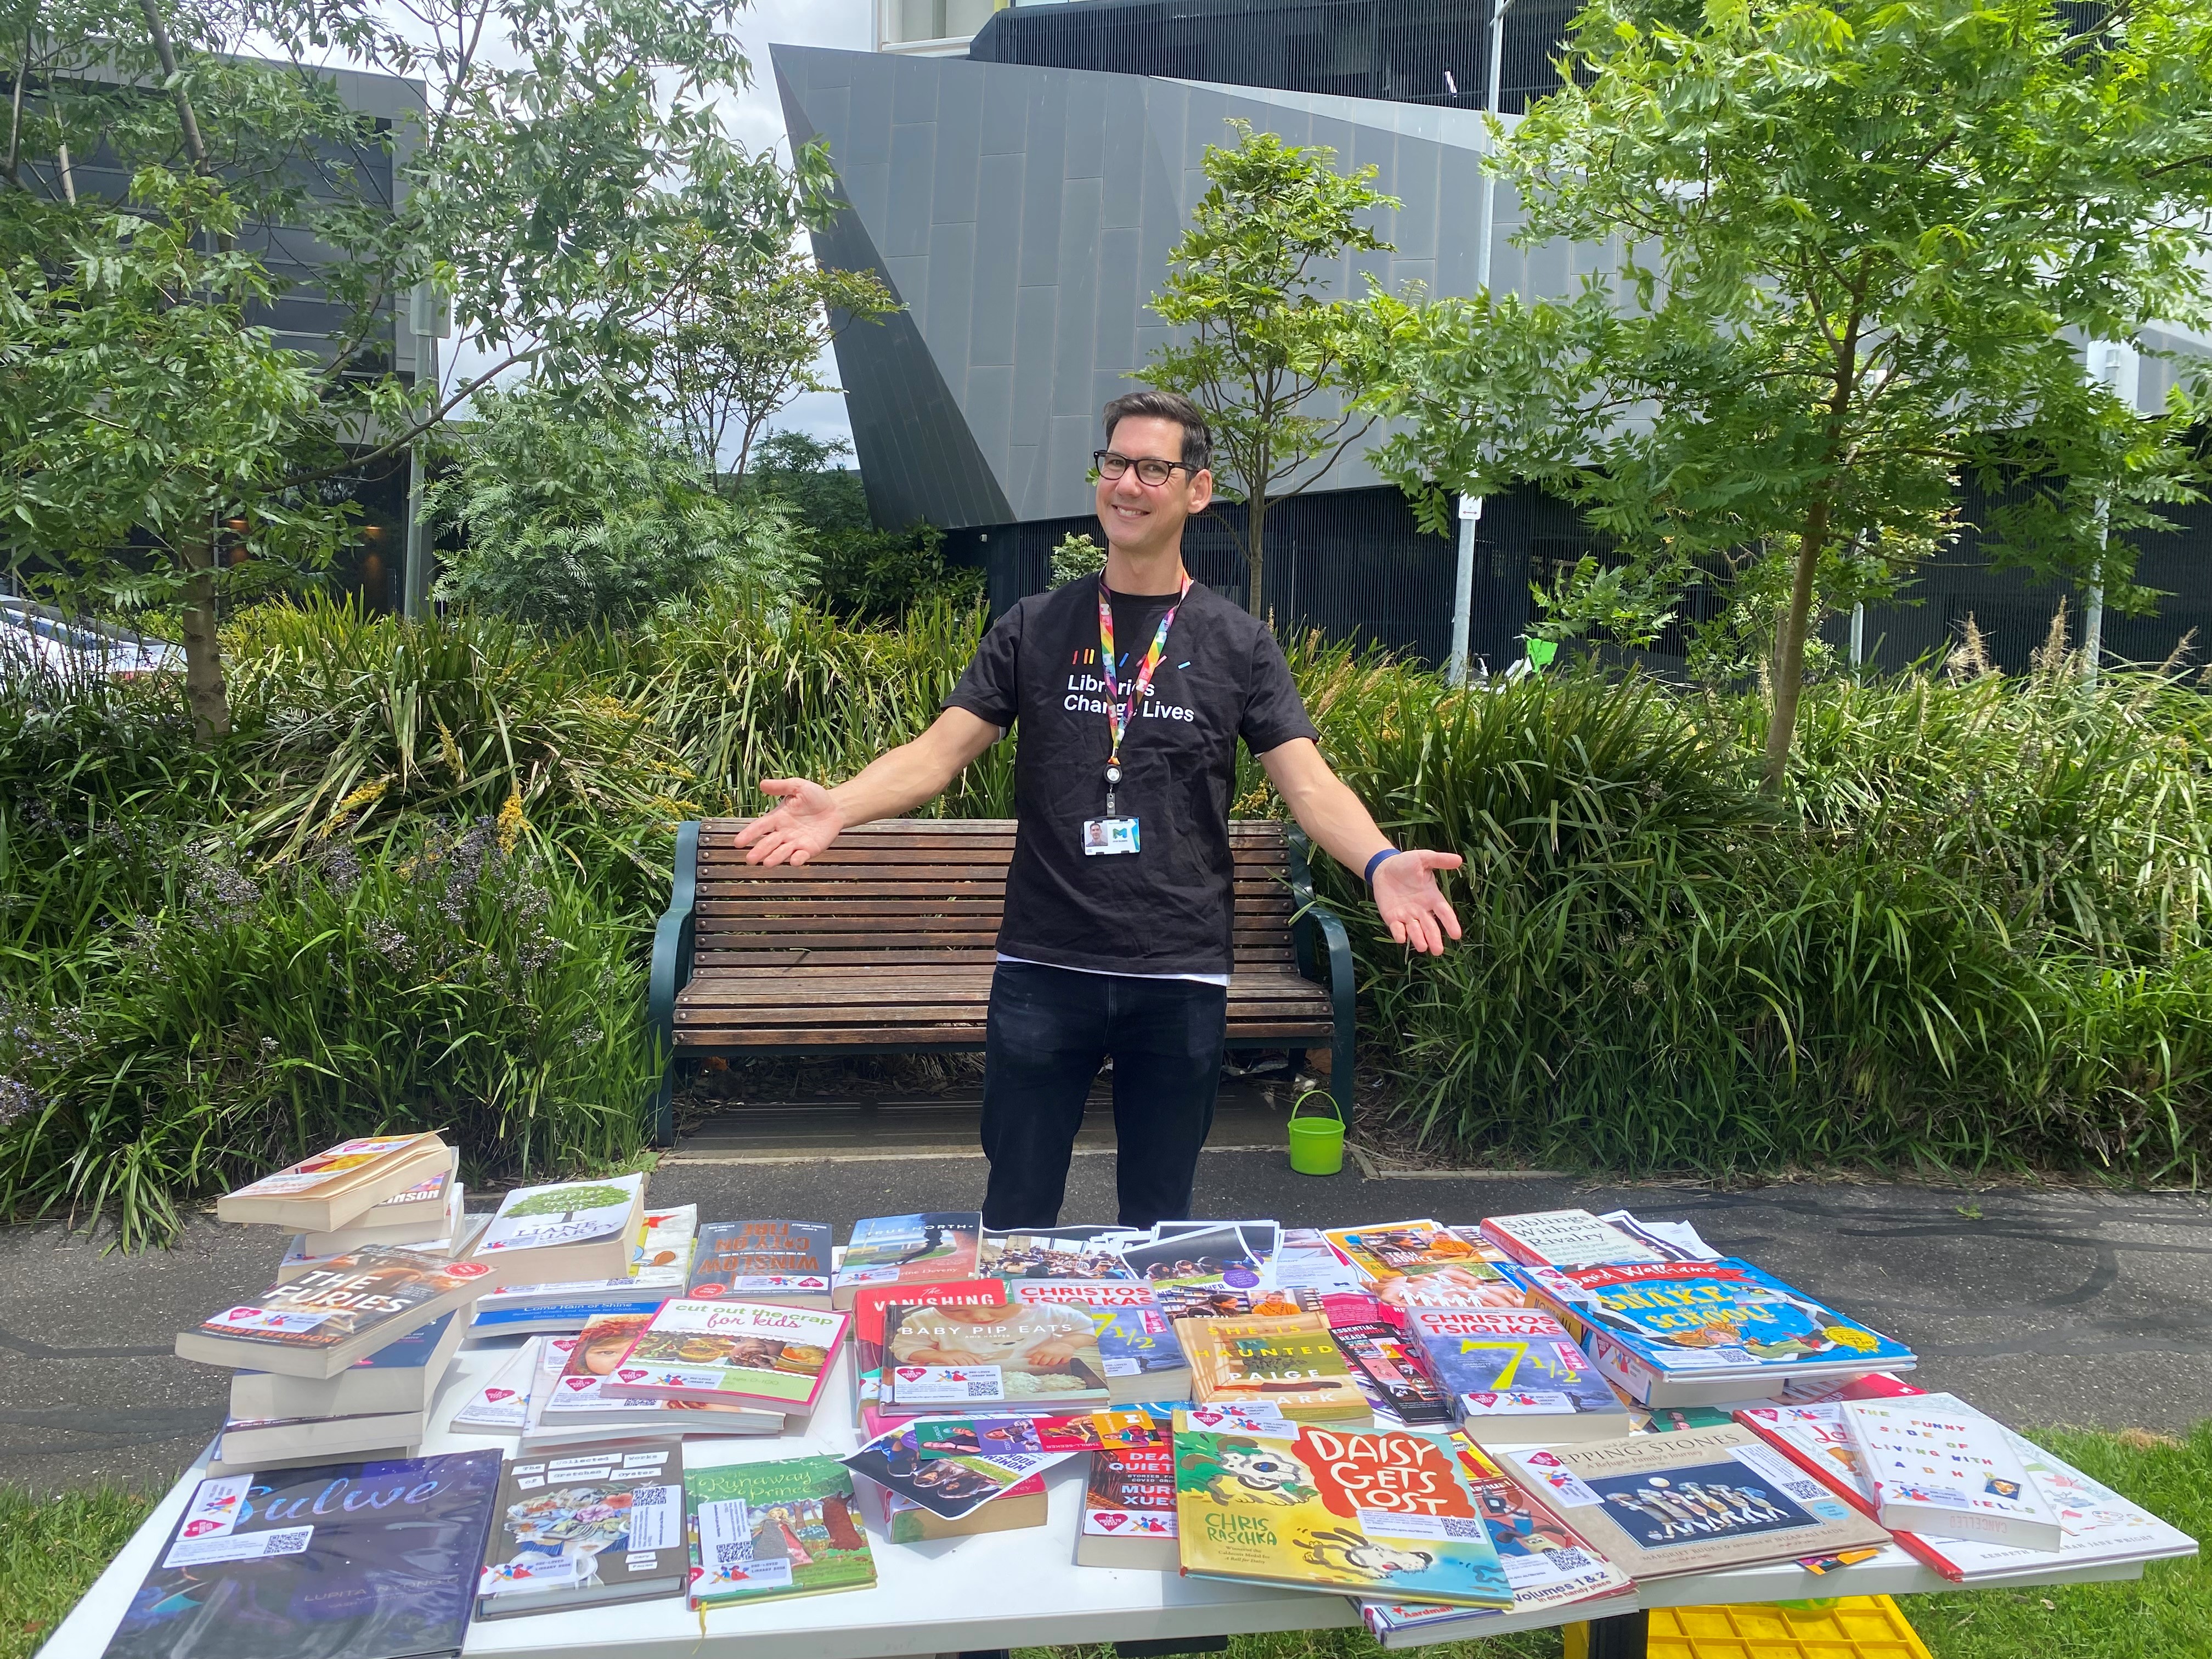 a librarian standing next to a table full of children's resources in a promotional stance